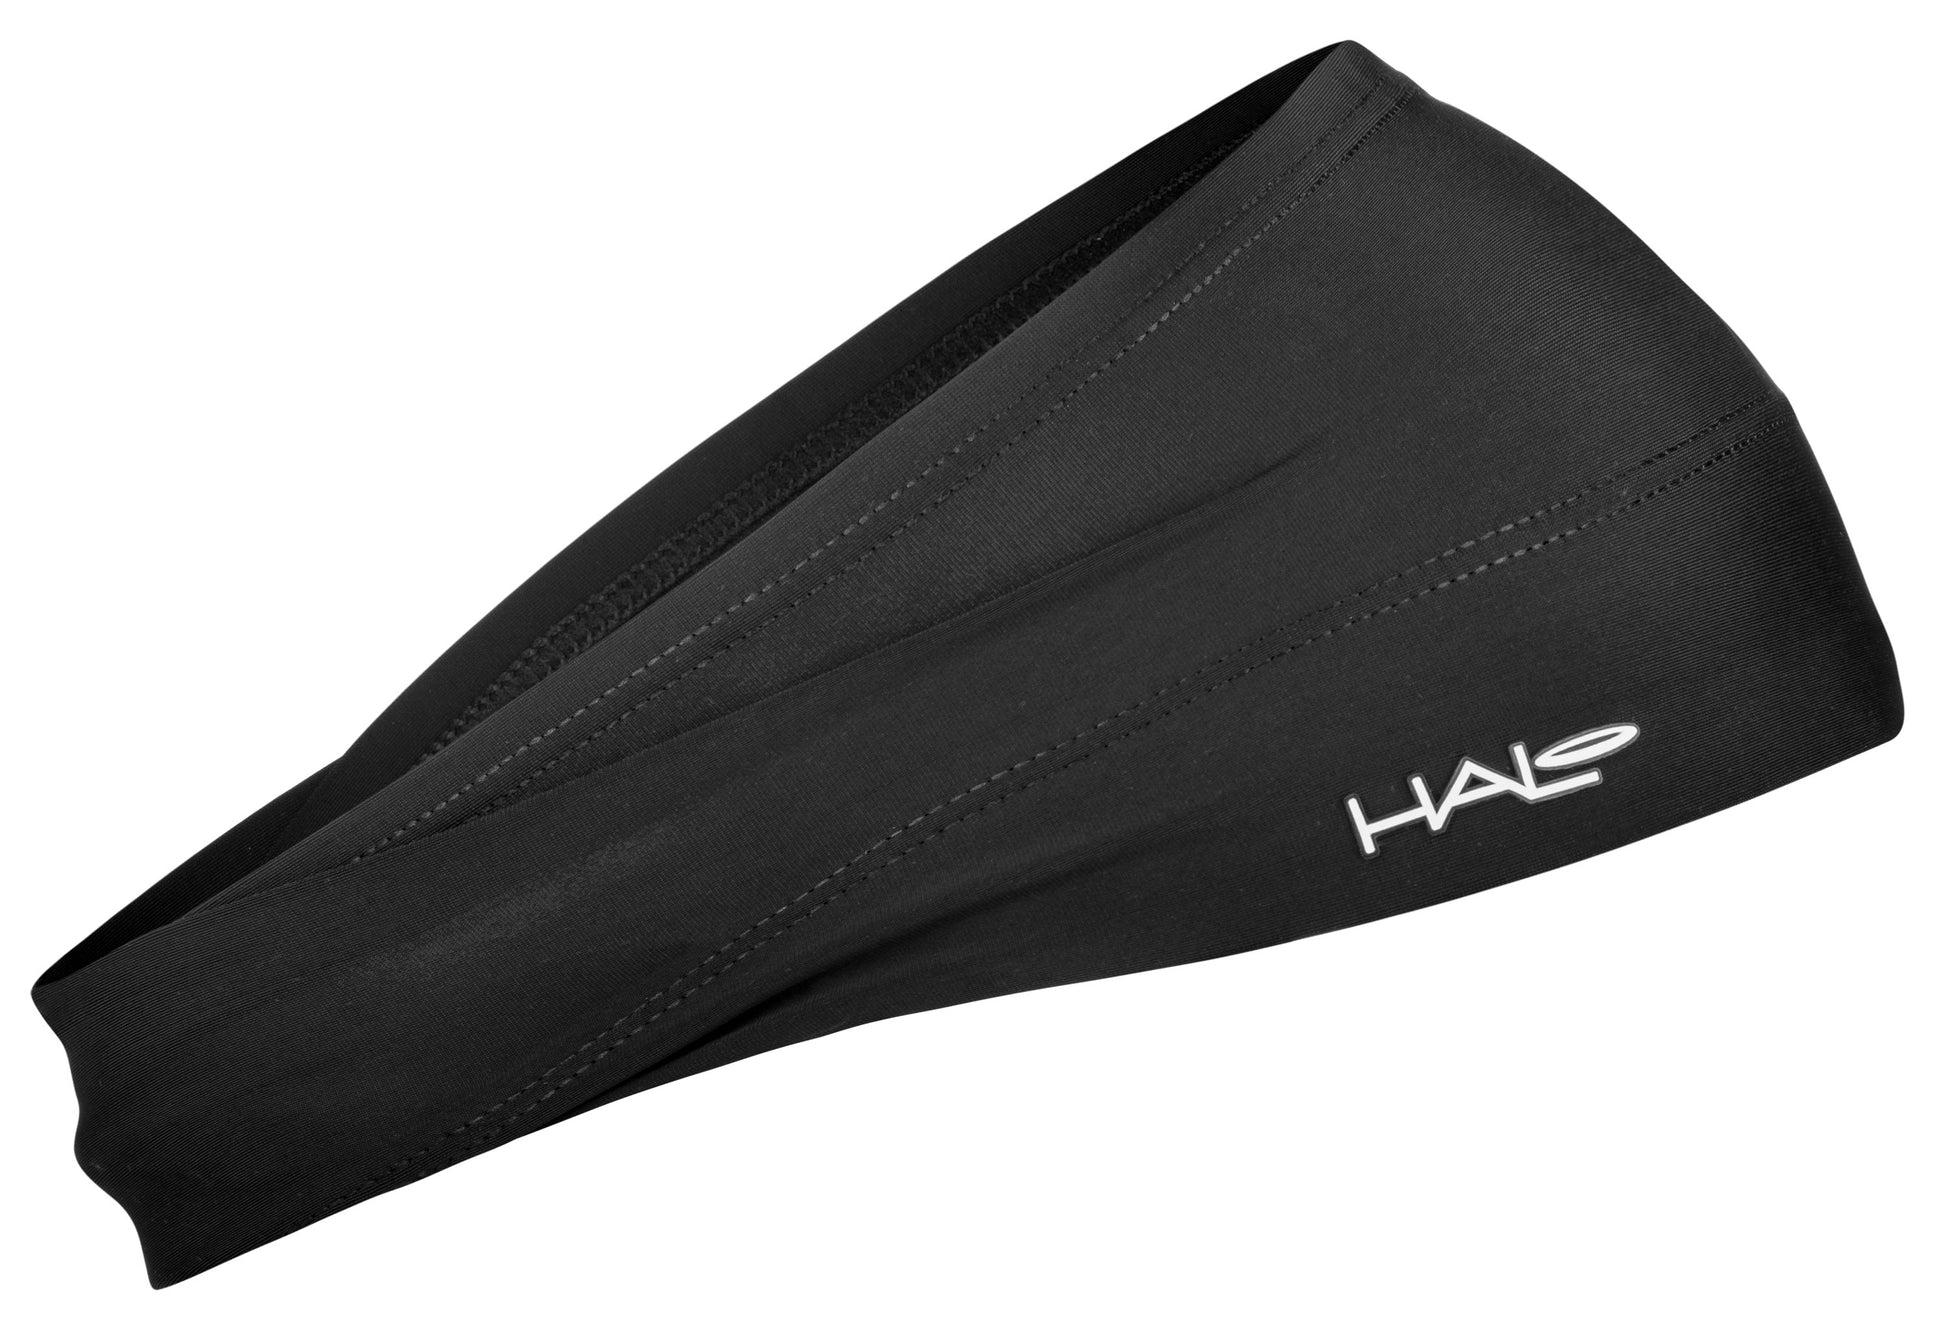 Halo, bandit pullover head band, side view in black